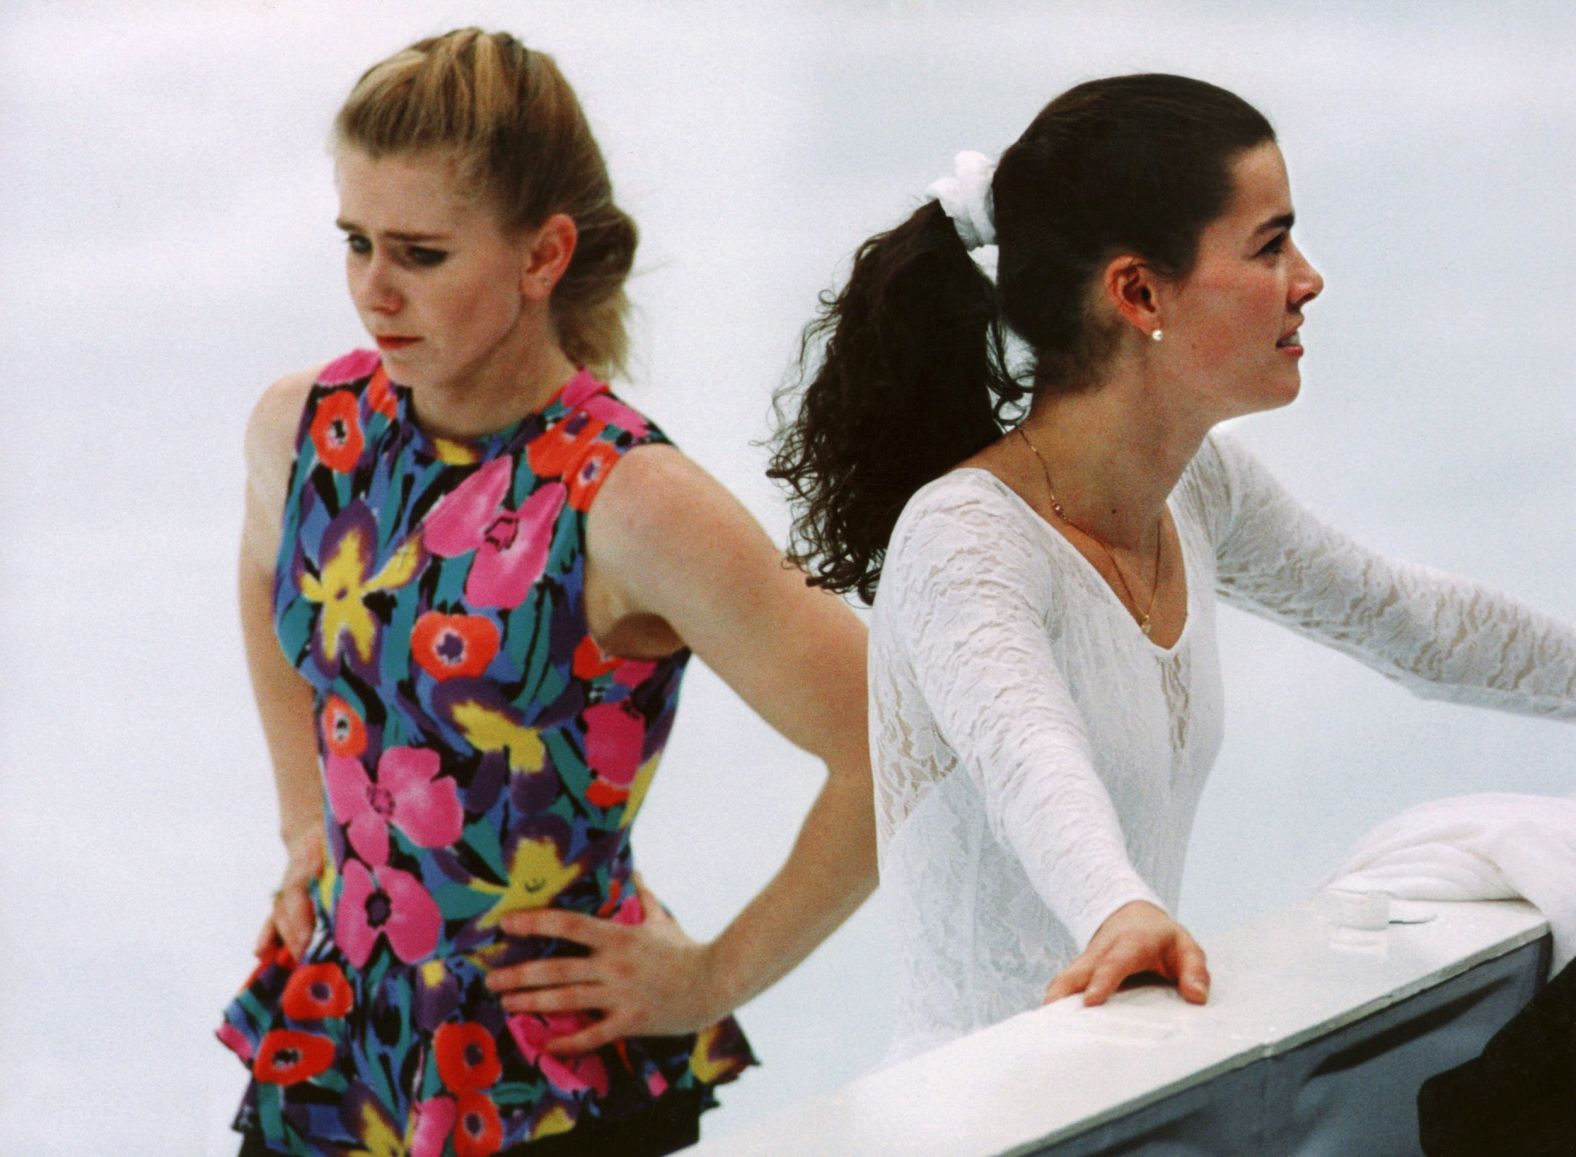 Just six weeks before the 1994 Winter Olympics, US figure skater Nancy Kerrigan was attacked by a man who had been hired by the ex-husband of her American rival, Tonya Harding. It sparked one of the biggest scandals in sports history and made for some awkward practice sessions in the days leading up to the Games. Kerrigan, seen here at right, recovered from her knee injury to win a silver medal, while Harding, left, placed eighth and was later banned for life from the sport. Harding denied having anything to do with the attack, but she did plead guilty to conspiring to hinder prosecution. She was given three years' probation, 500 hours of community service and a $160,000 fine.